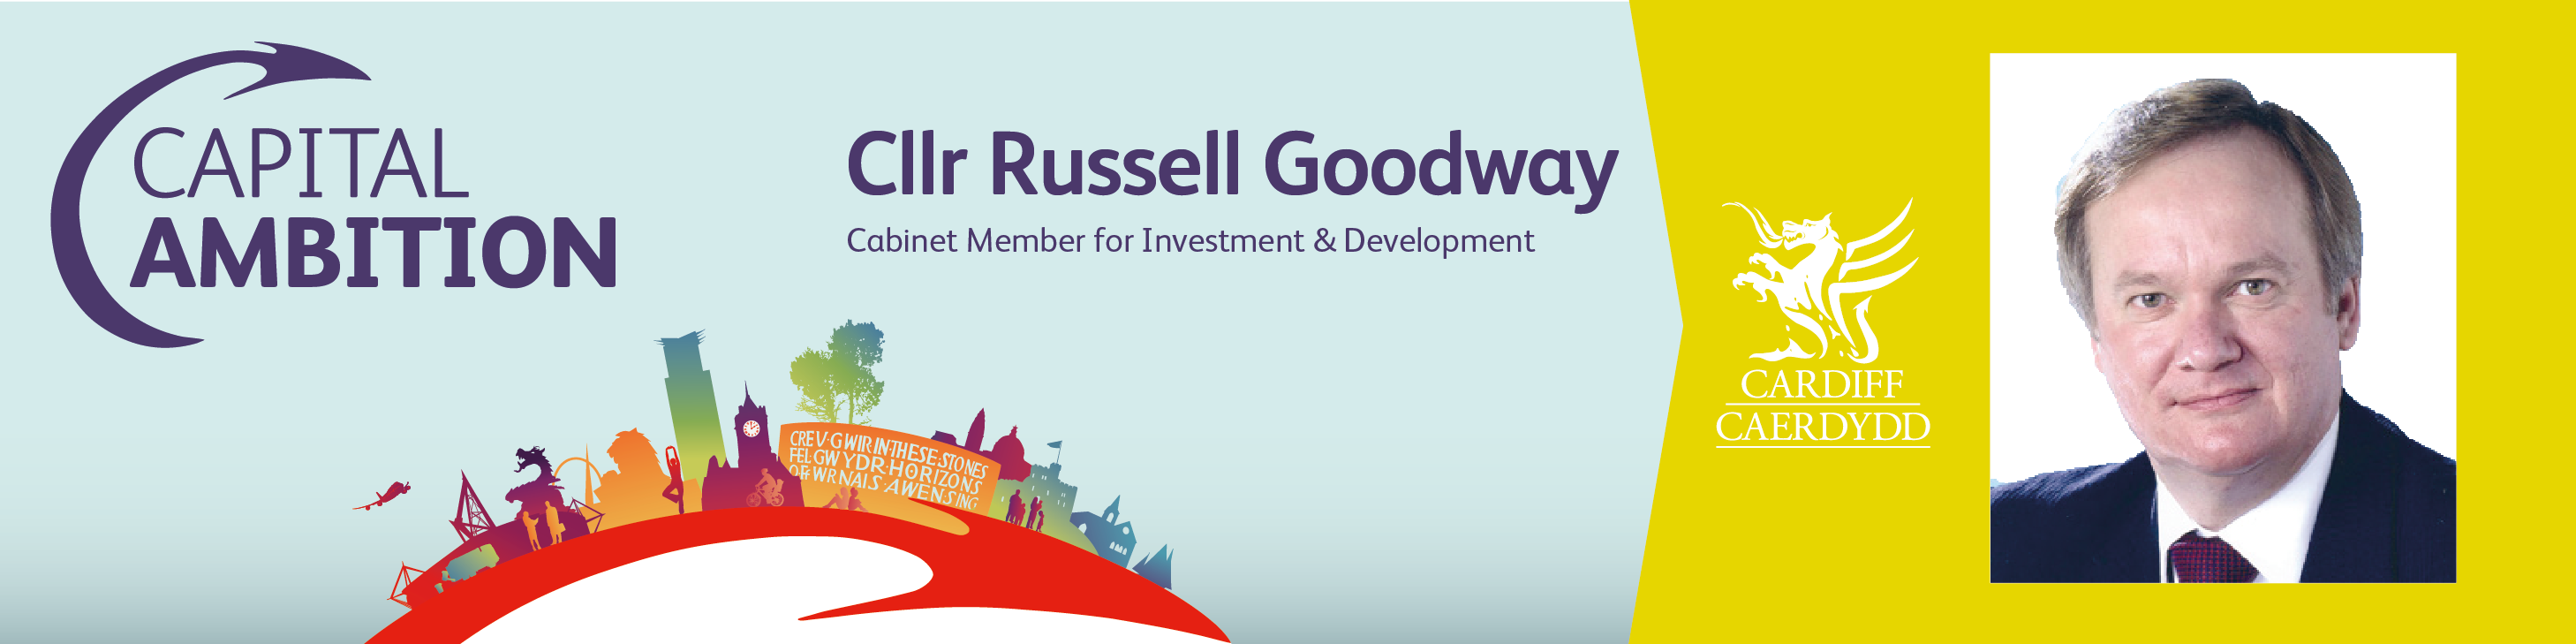 Councillor Russell Goodway